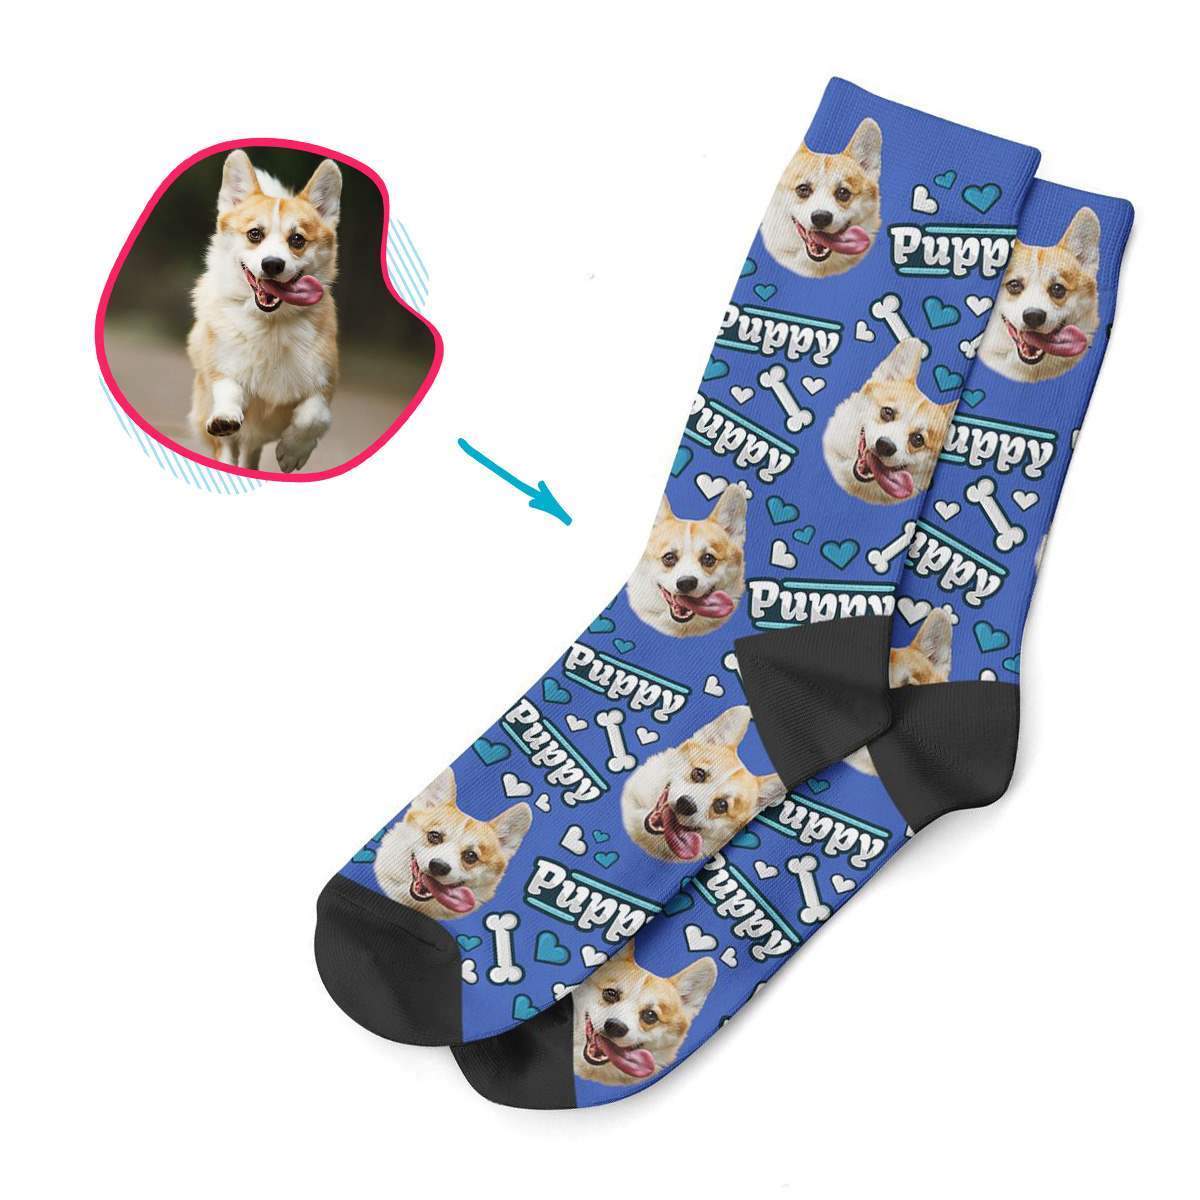 darkblue Puppy socks personalized with photo of face printed on them